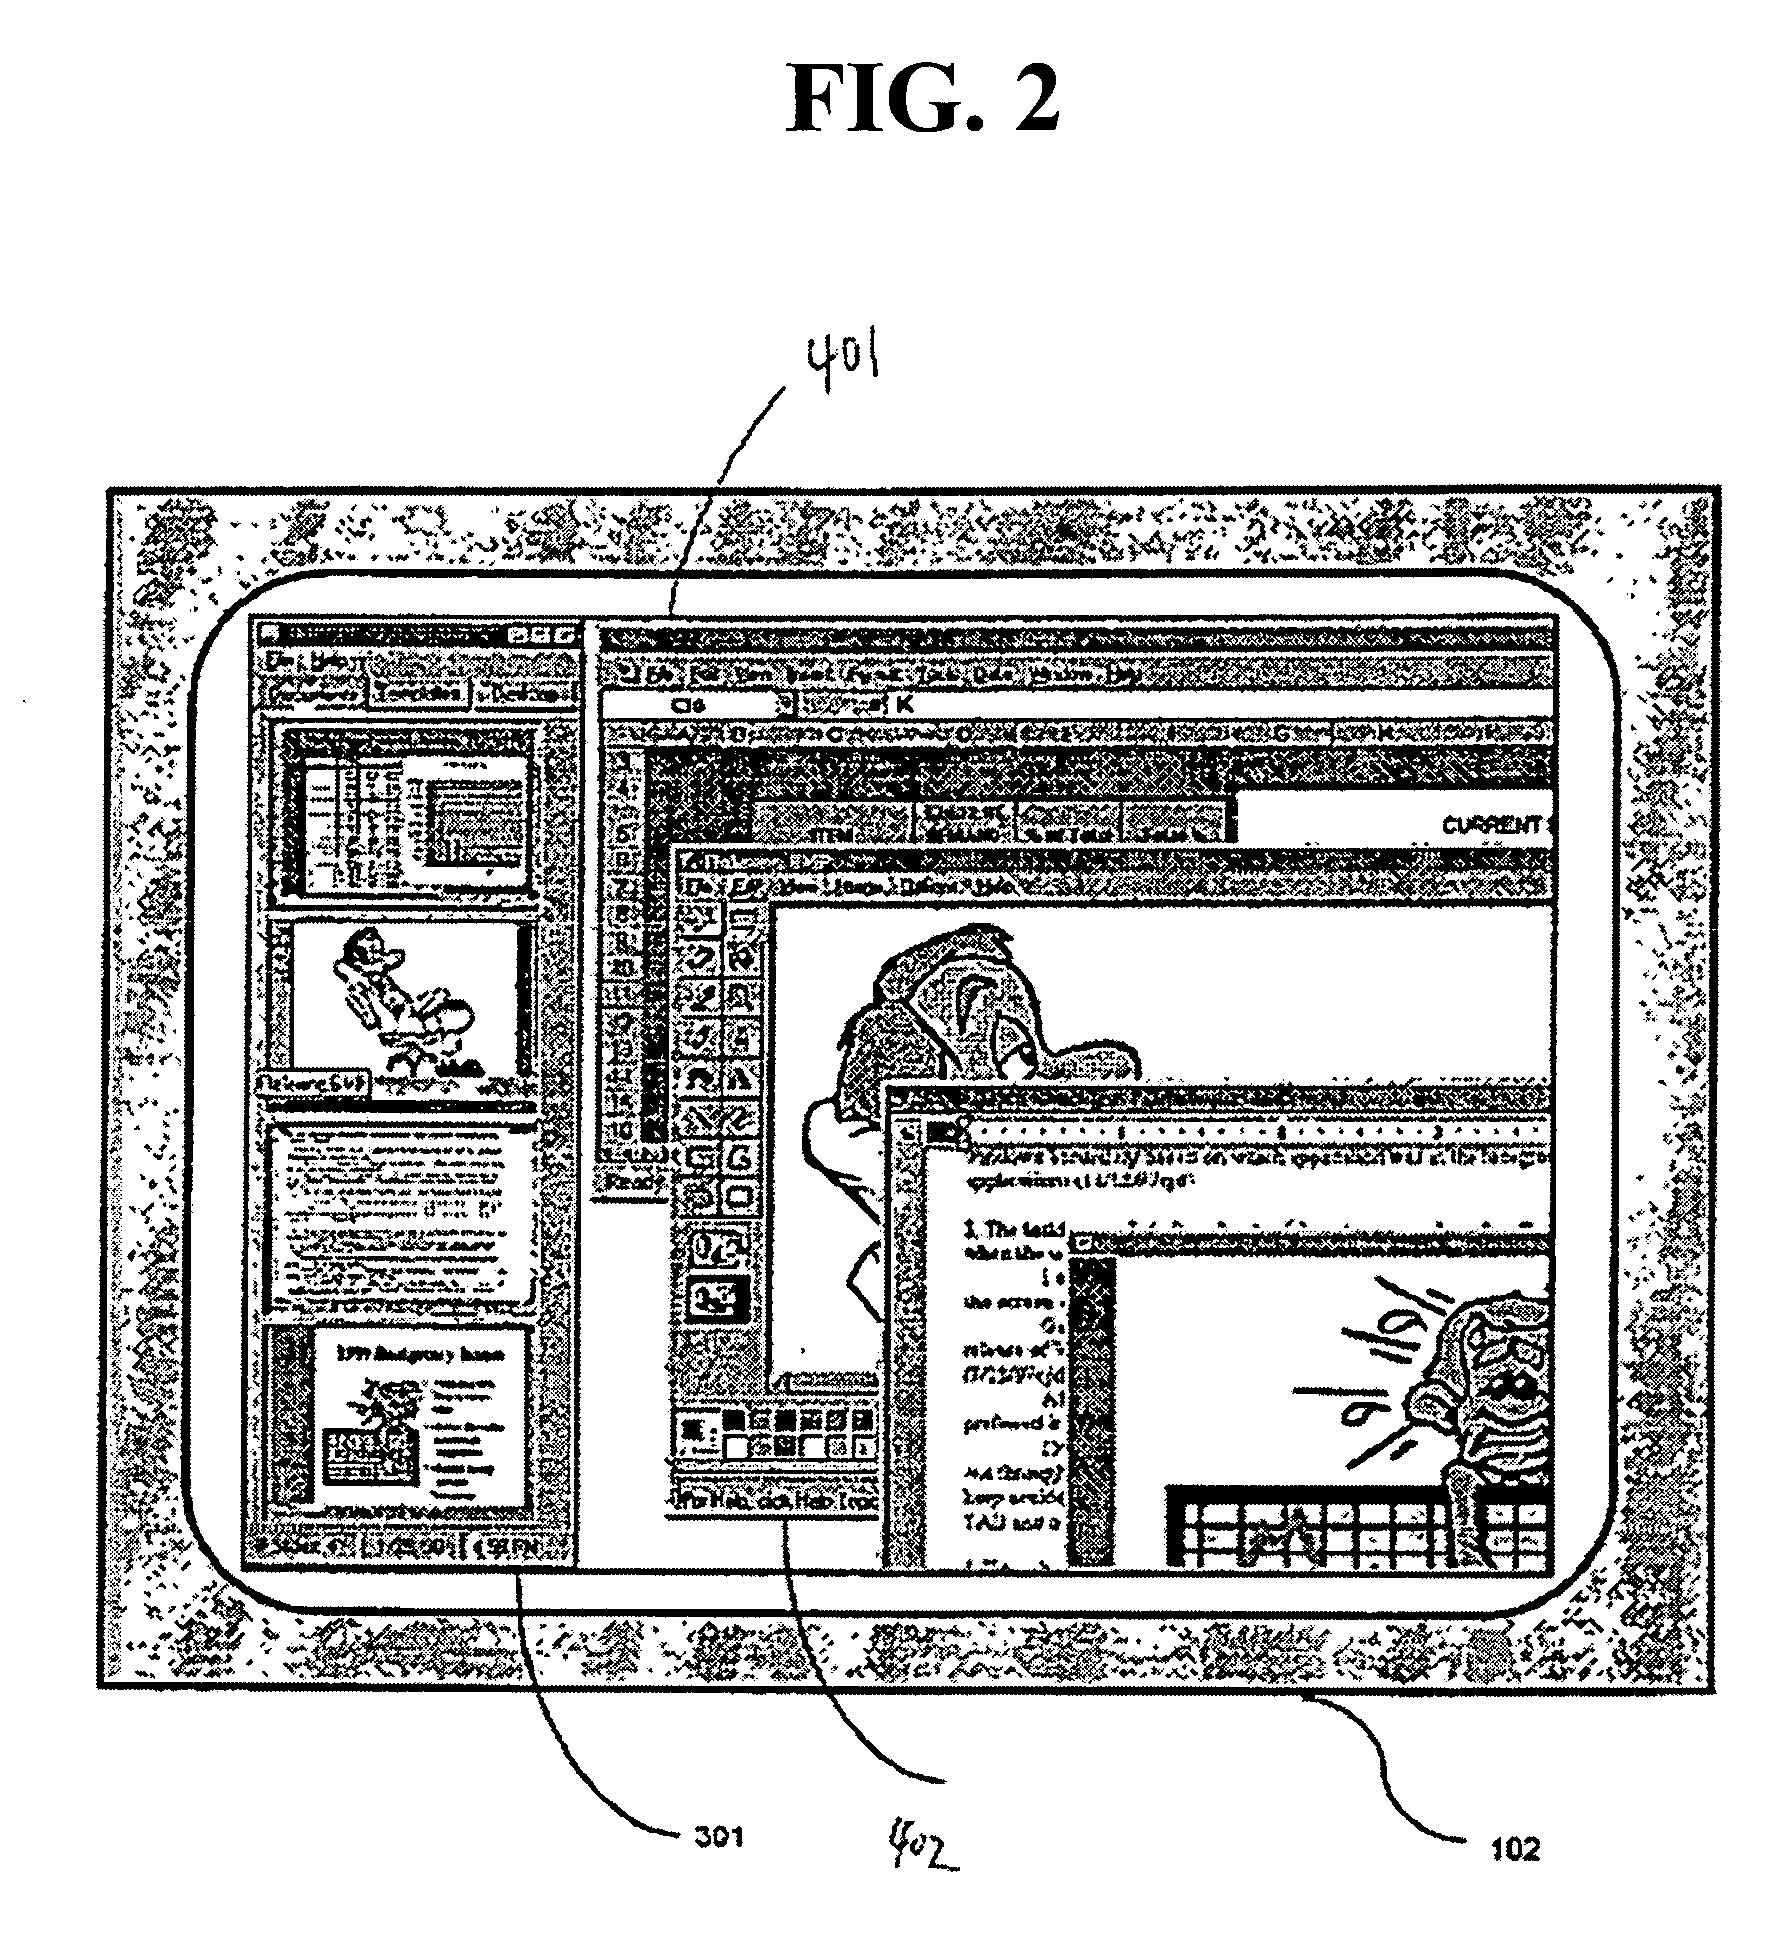 System and method for iconic software environment management